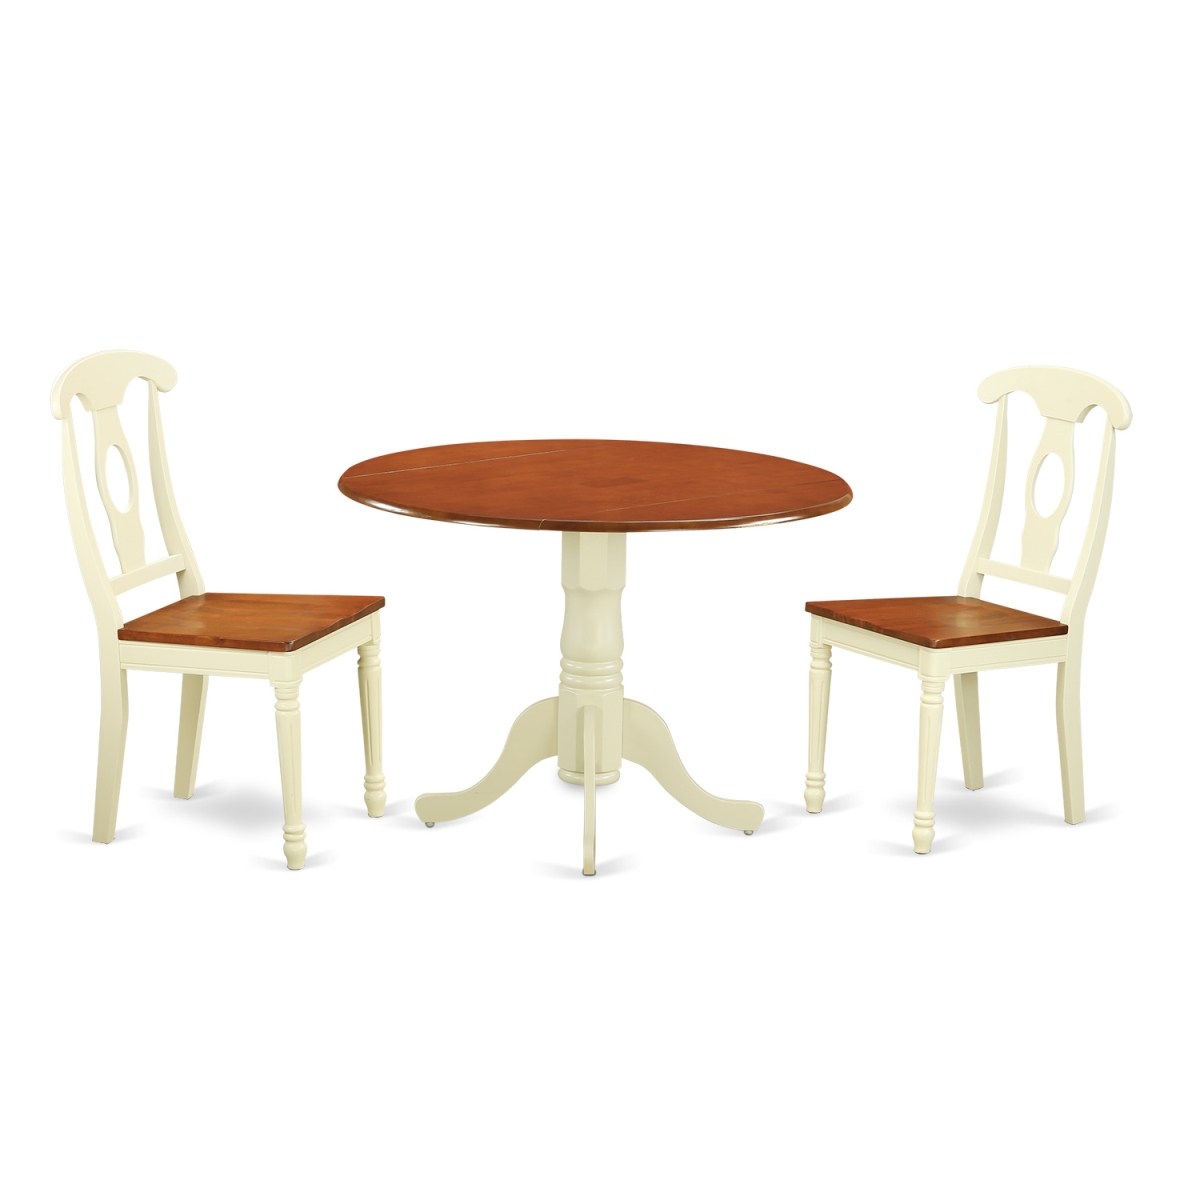 Picture of East West Furniture DLKE3-BMK-W Dining Set - Table & 2 Chairs, Buttermilk & Cherry - 3 Piece